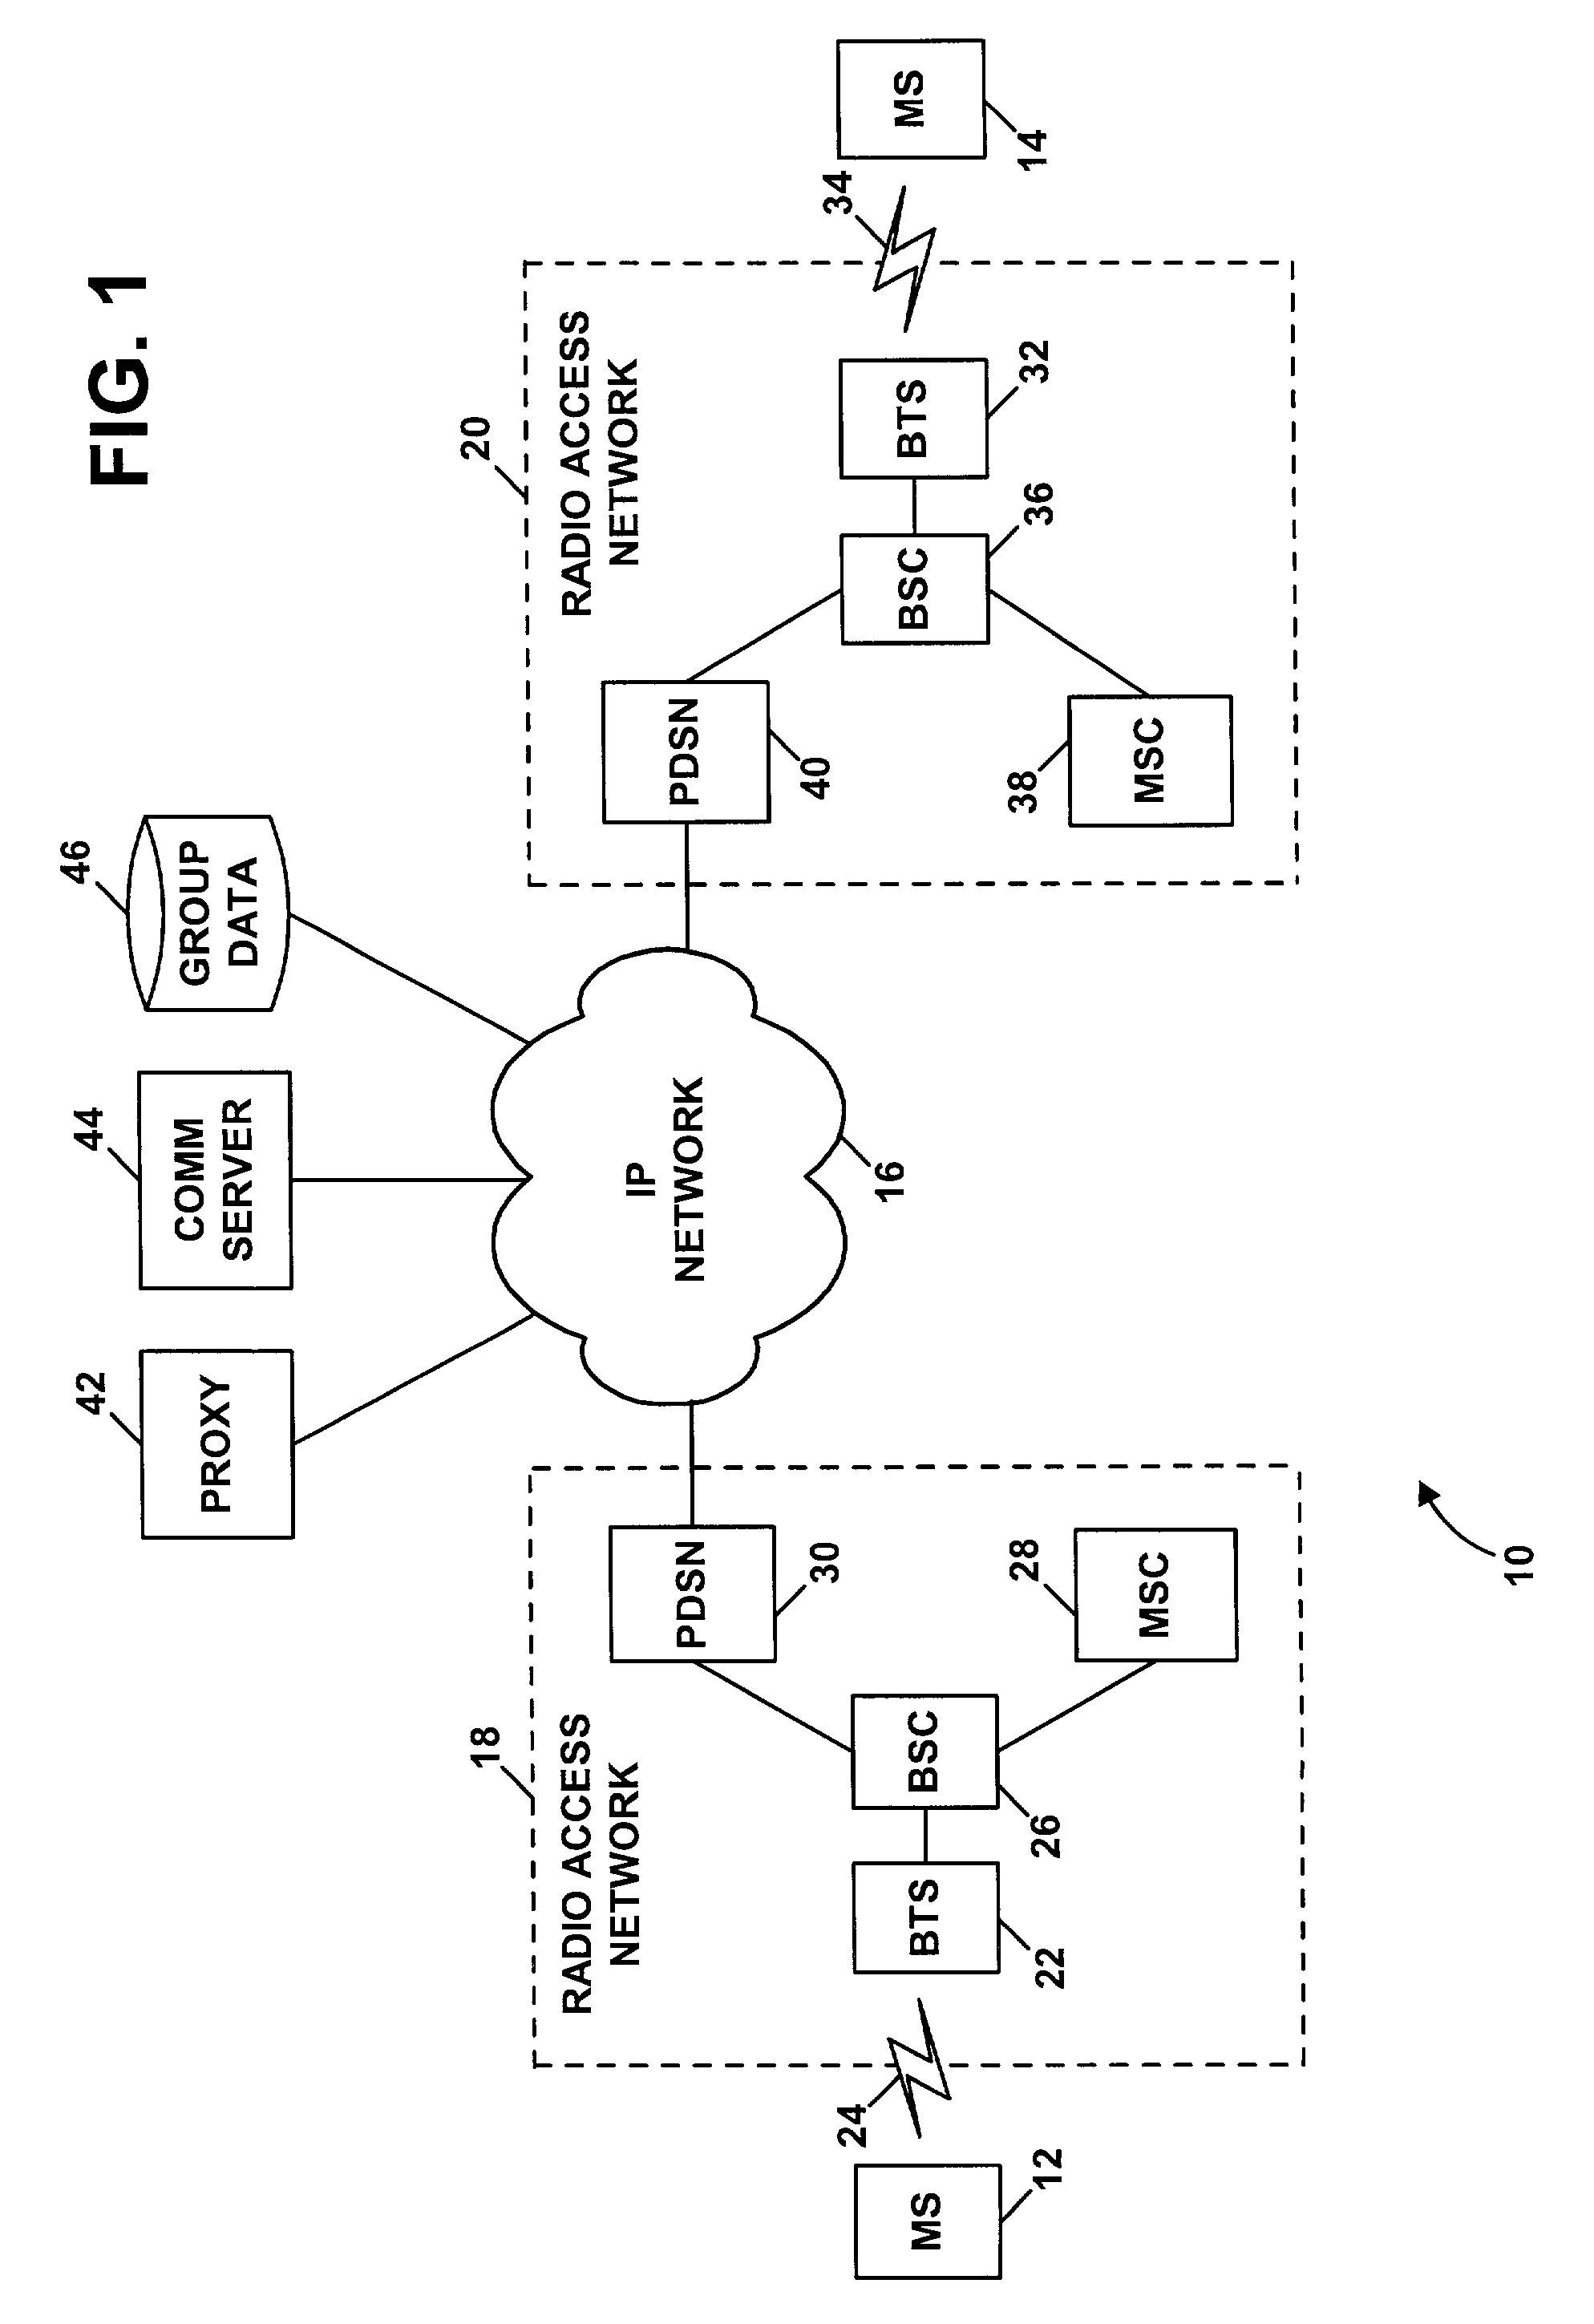 Method and system for selectively reducing call-setup latency through management of paging frequency